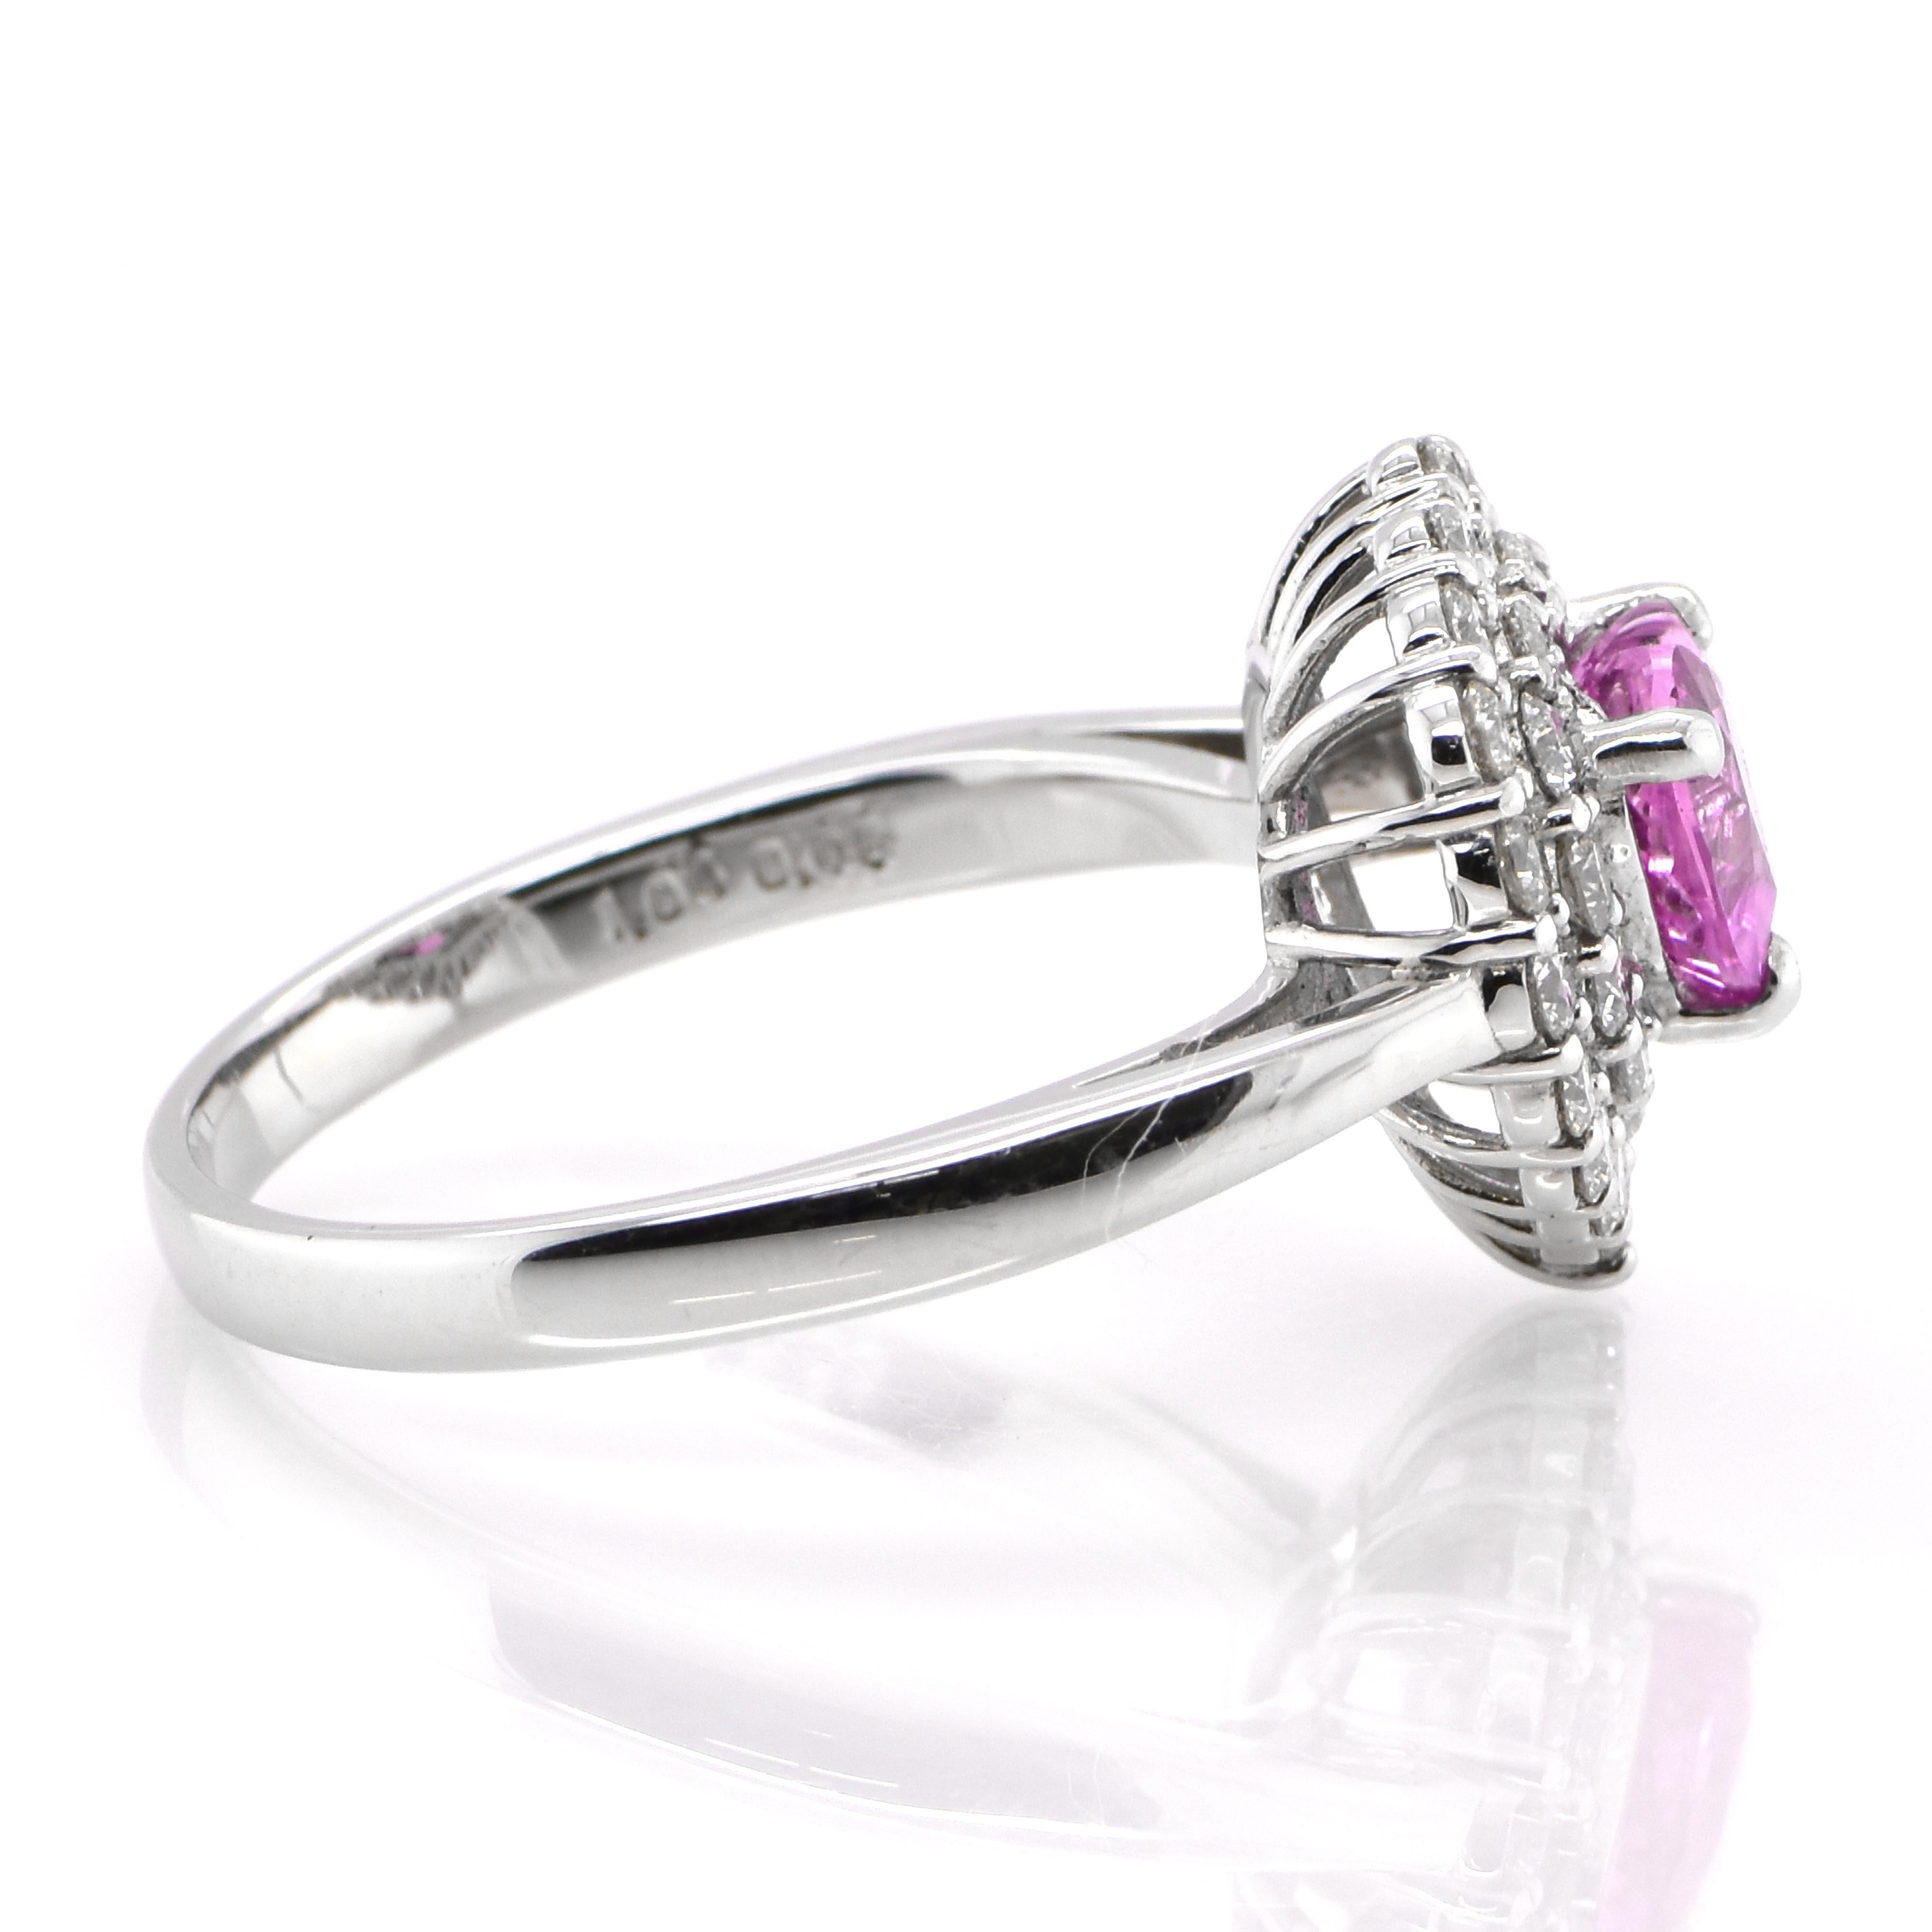 1.06 Carat Heart-Cut Pink Sapphire and Diamond Double-Halo Ring Set in Platinum In New Condition For Sale In Tokyo, JP